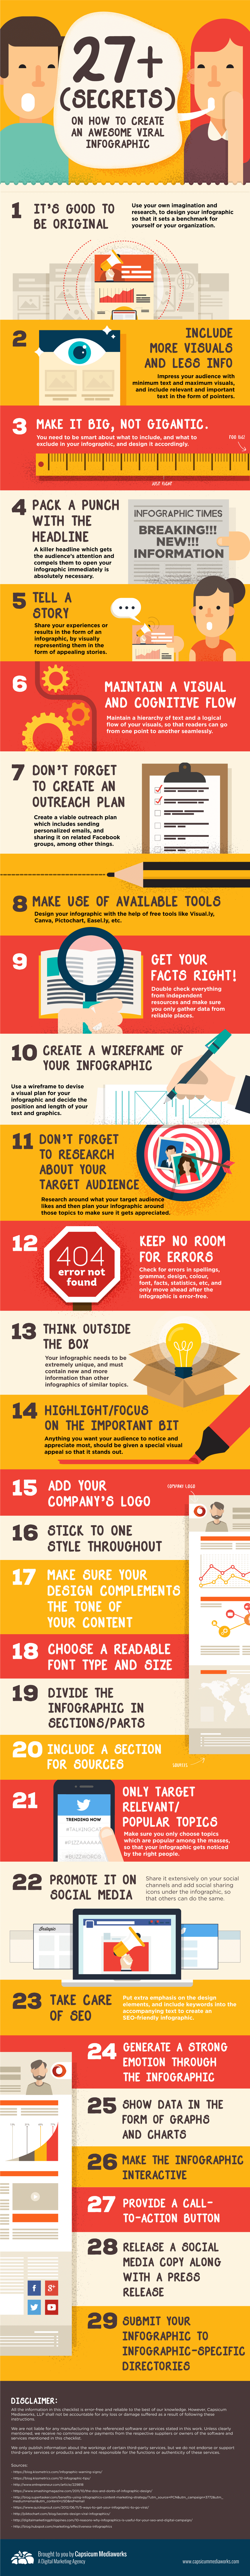 Viral Infographic